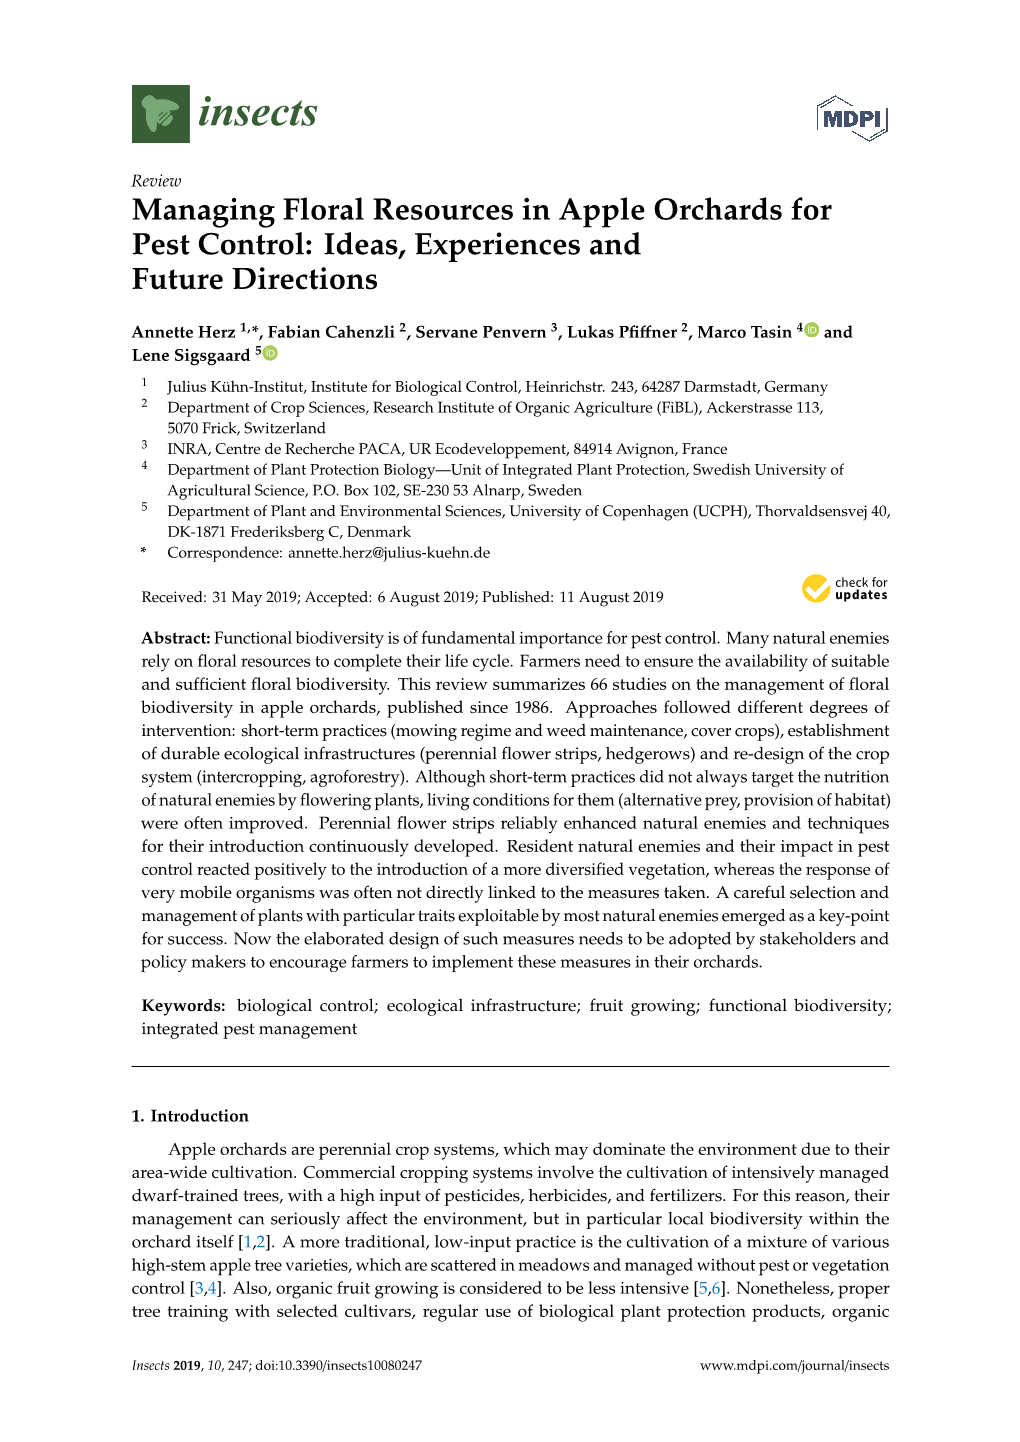 Managing Floral Resources in Apple Orchards for Pest Control: Ideas, Experiences and Future Directions